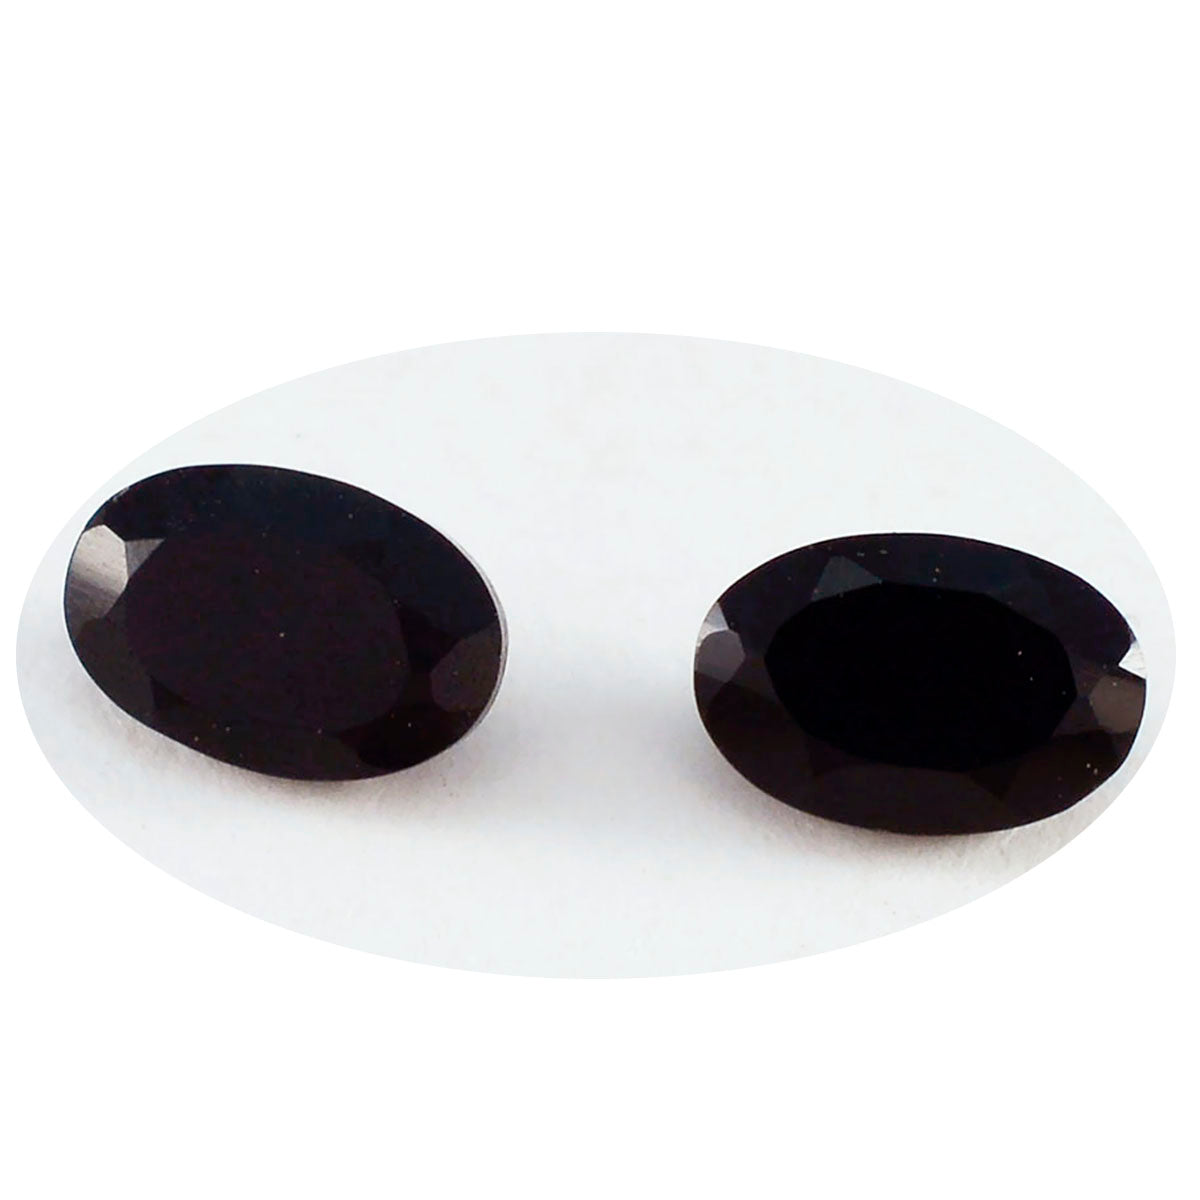 Riyogems 1PC Natural Black Onyx Faceted 5x7 mm Oval Shape great Quality Loose Gems